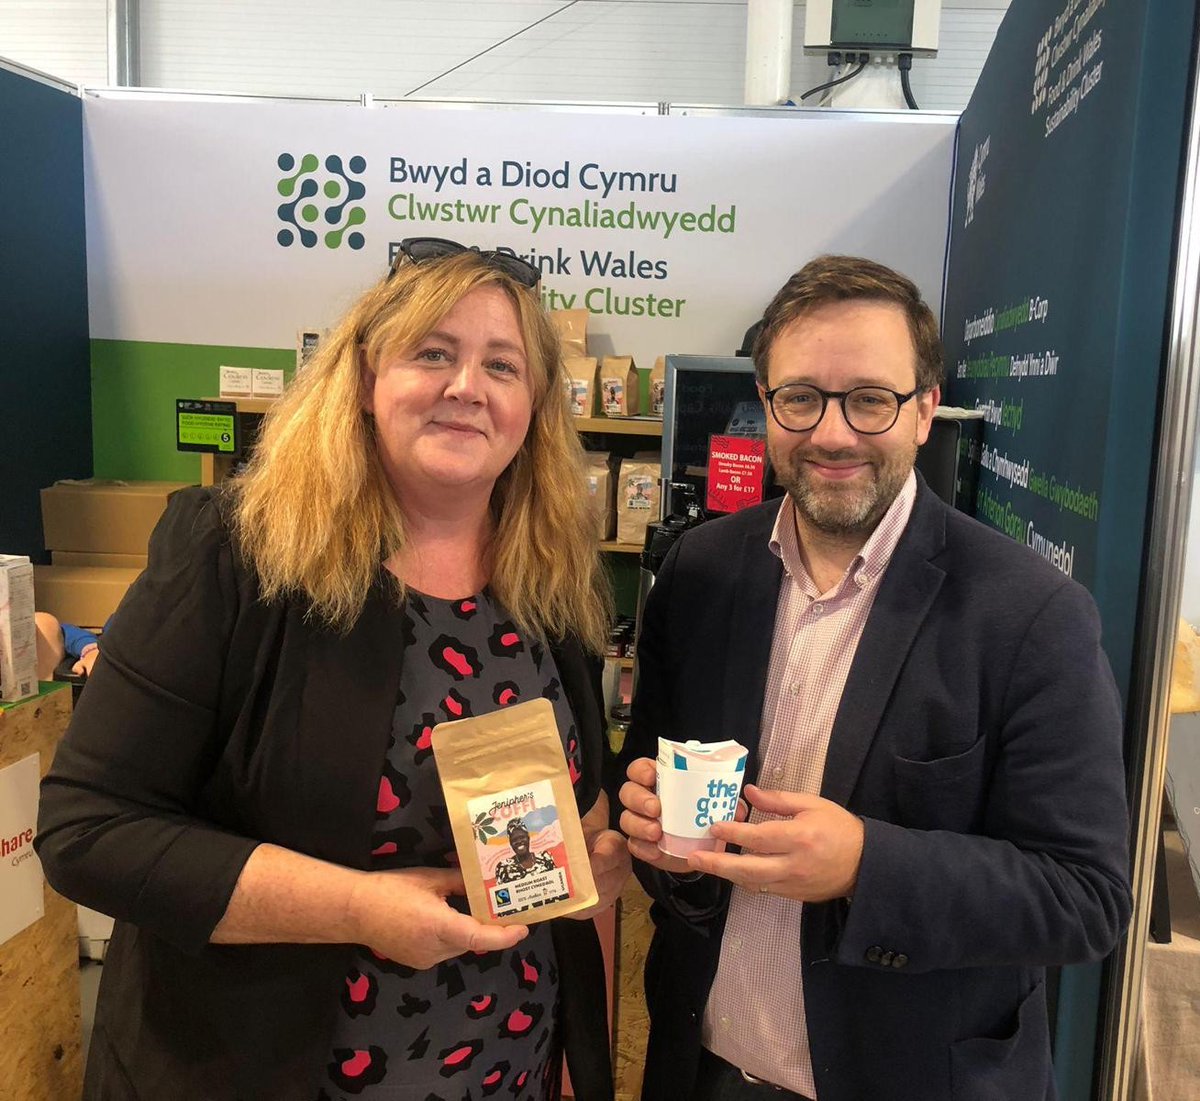 With the dust having settled now on the #royalwelshshow we wanted to thank everyone who came by our Sustainability Cluster stand. We had lots of producers attend and this drew in a lovely mix of visitors. Diolch yn fawr/ Thank you very much!